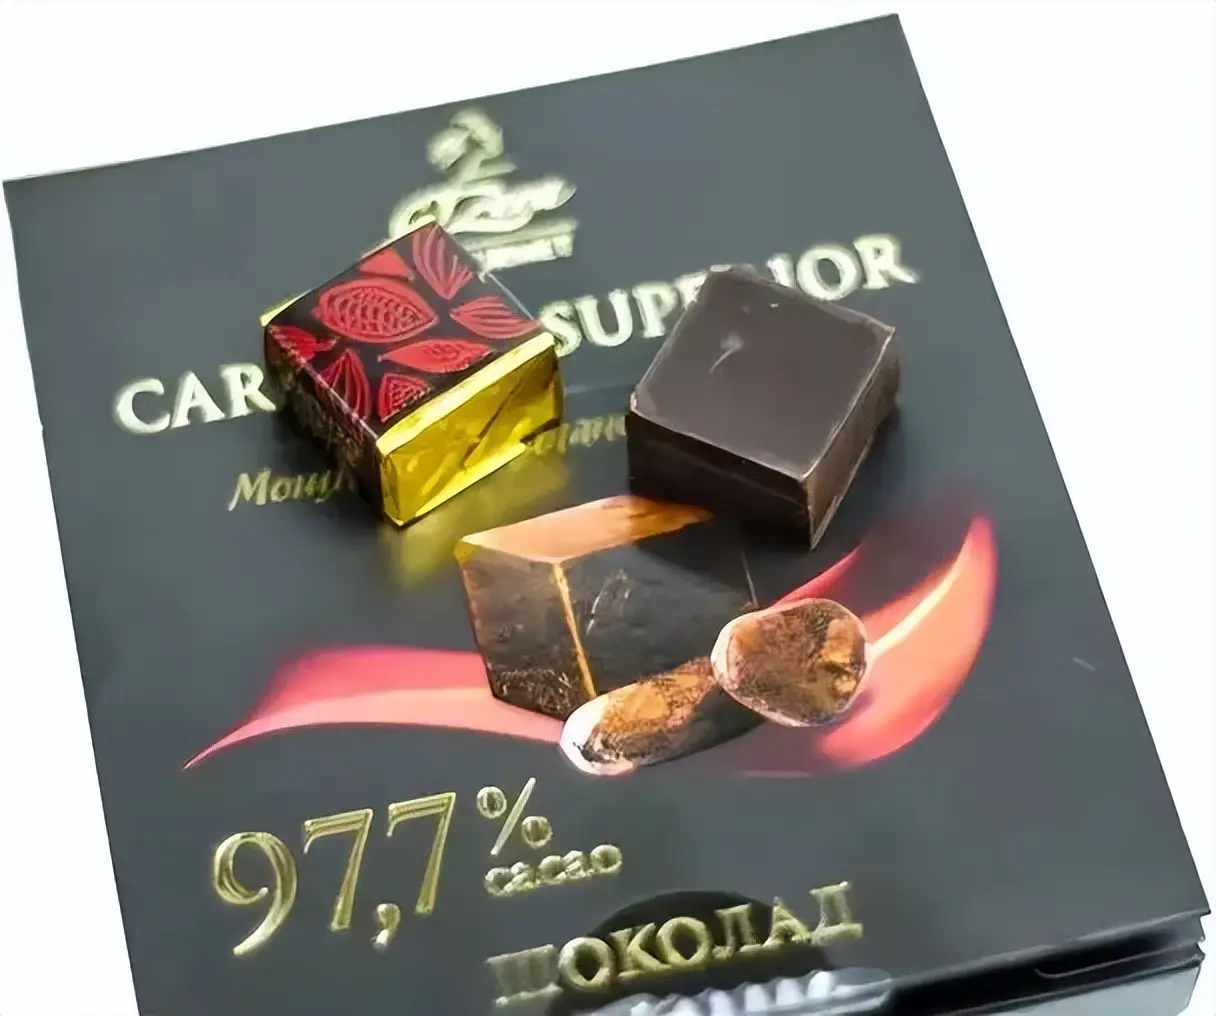 Ozere - one of the famous Russian chocolate brands